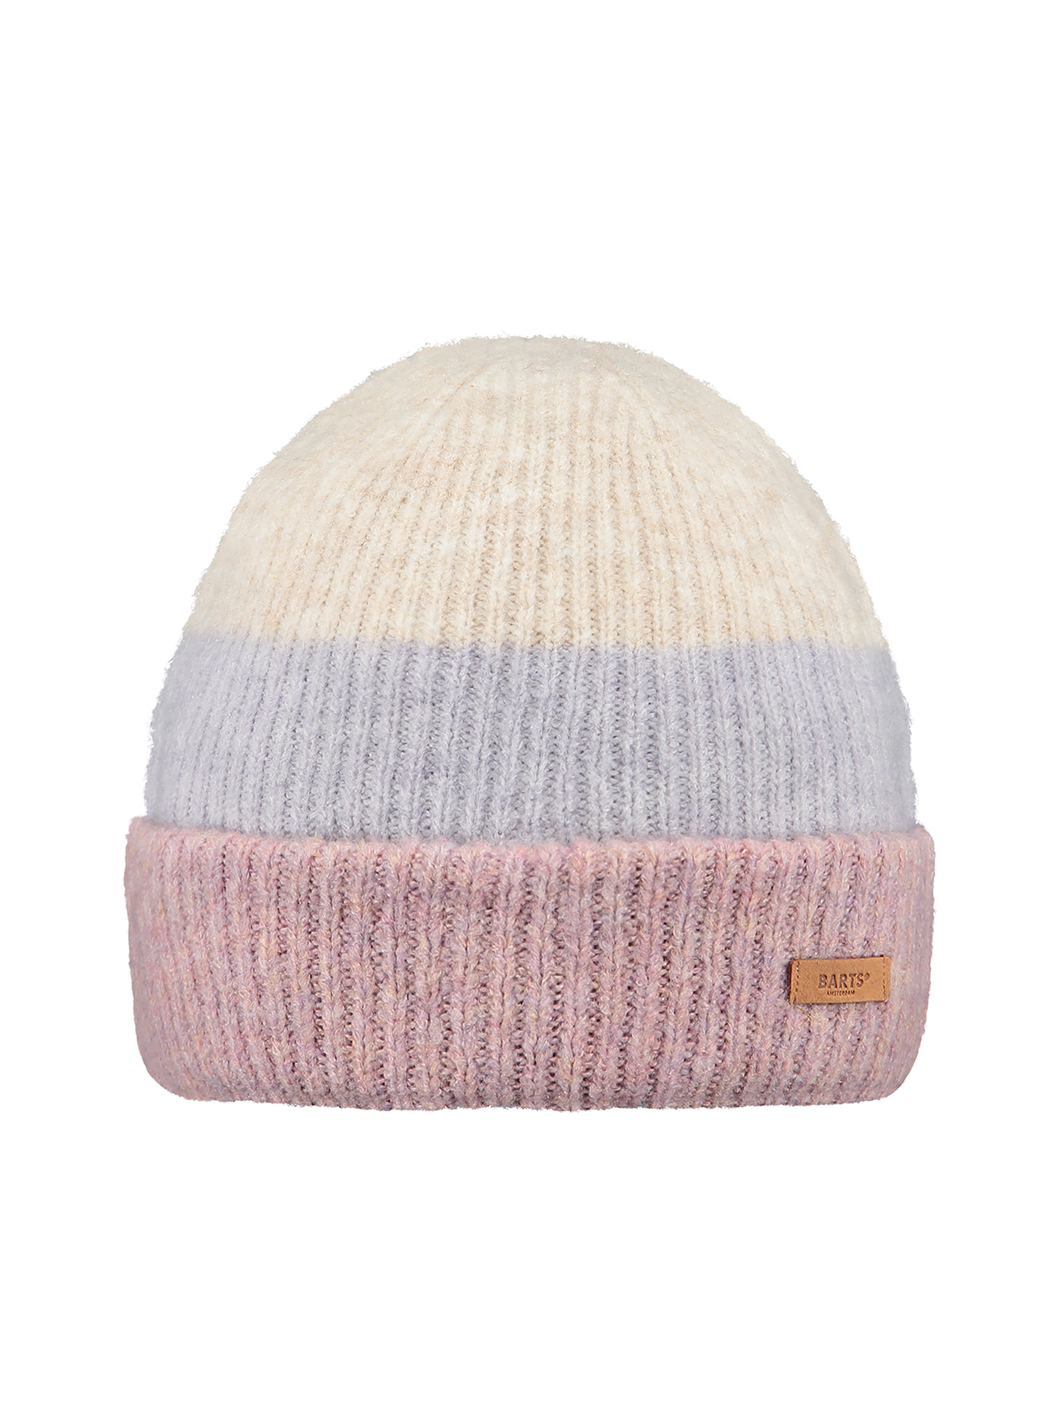 Suzam Beanie - Orchid | One size